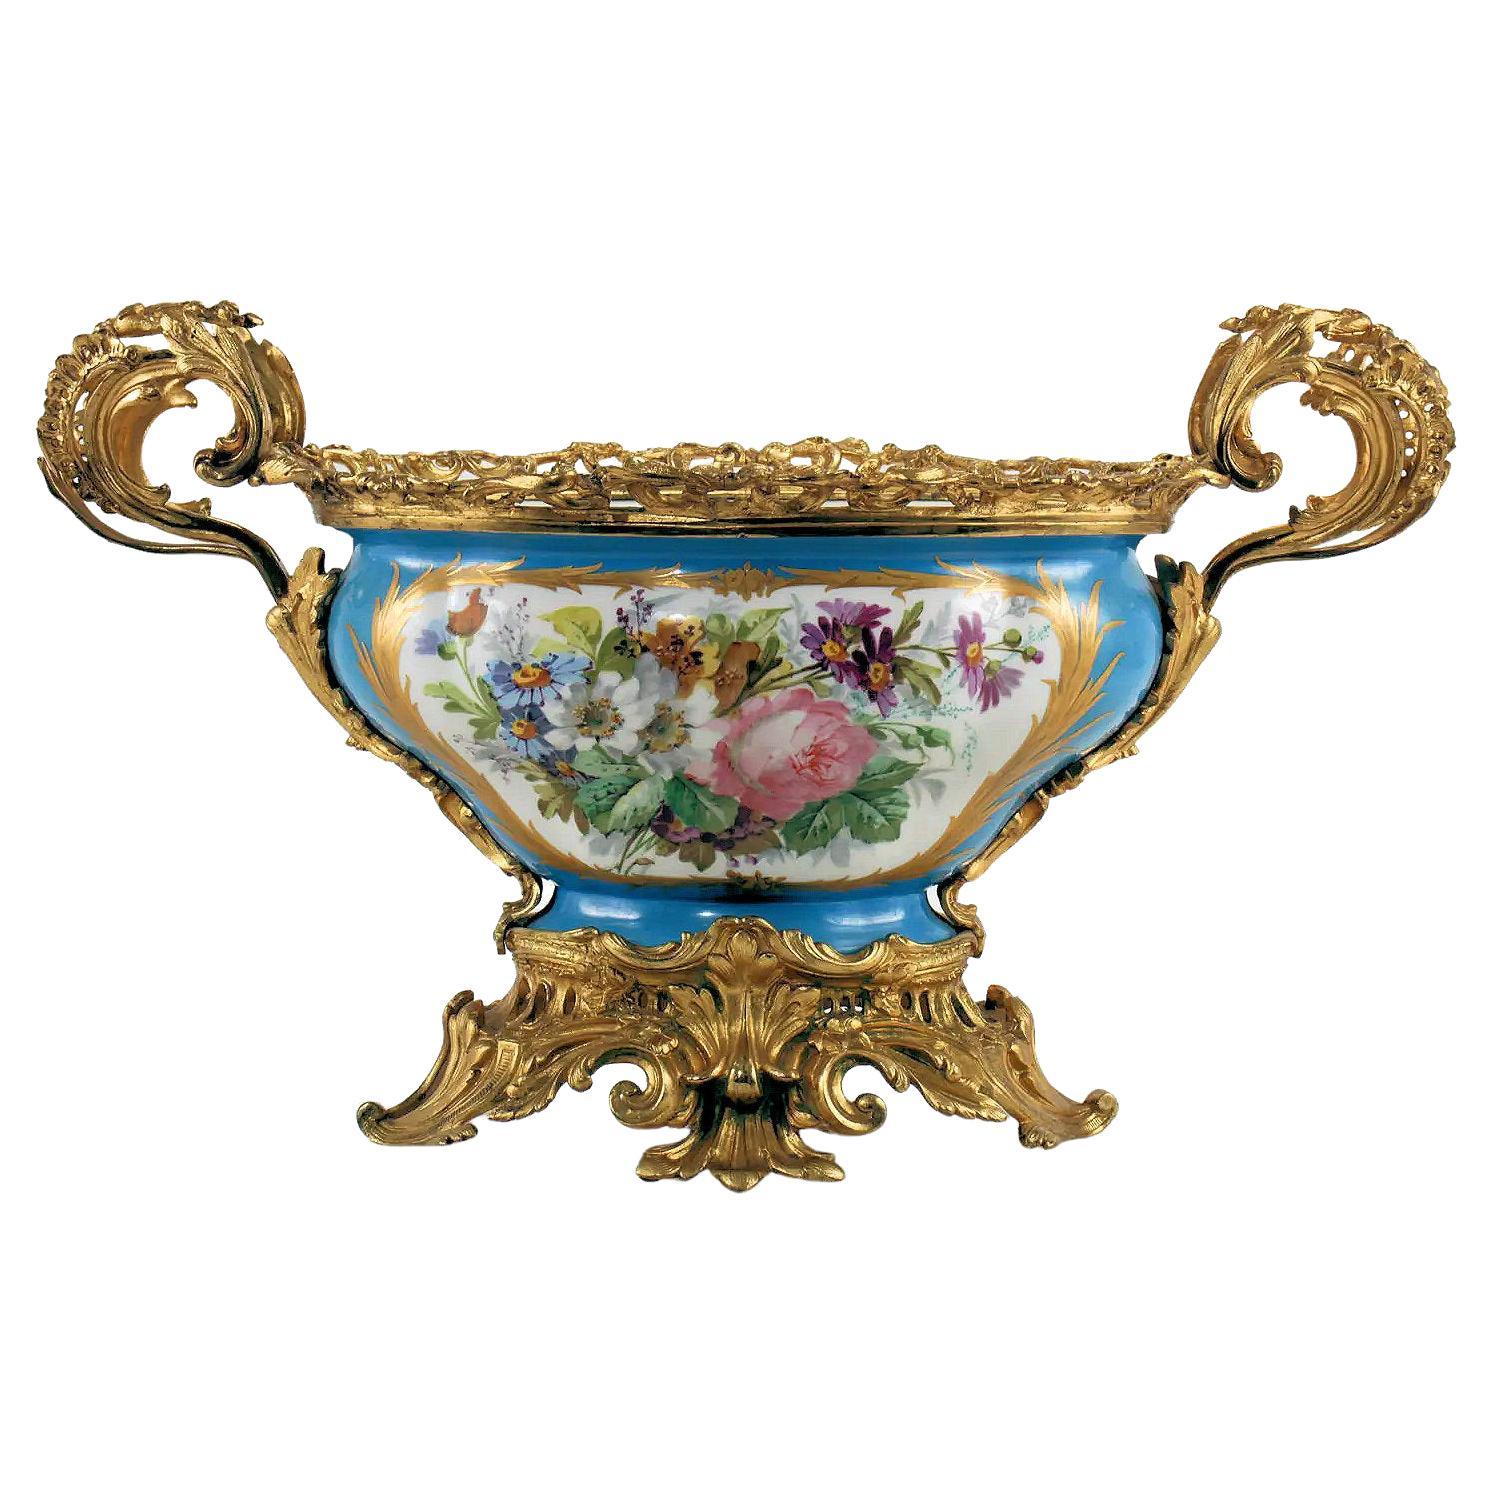 Finest quality large French 19th century sevres style gilt bronze mounted hand painted celest blue porcelain centerpiece.